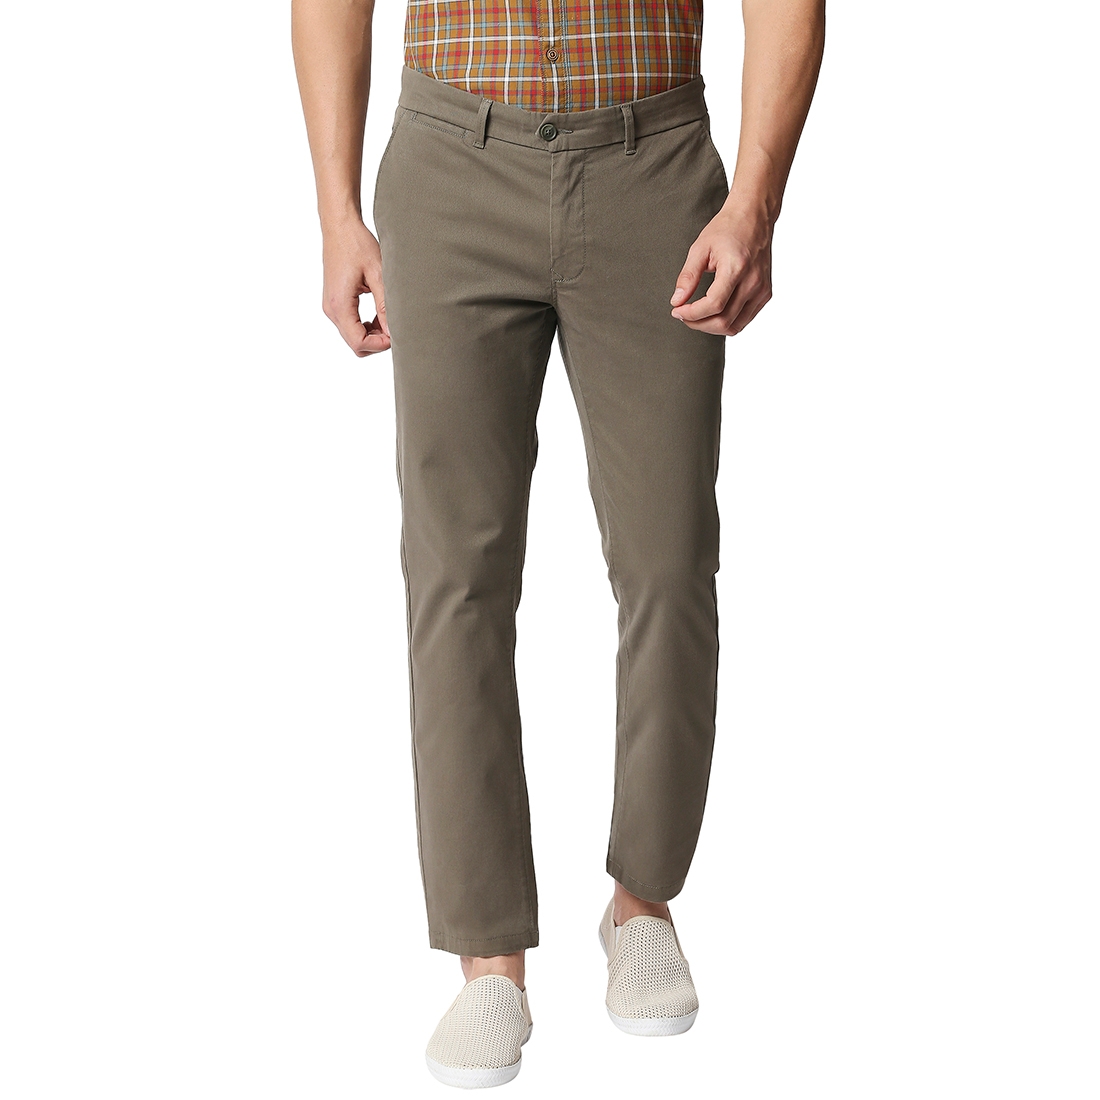 Basics | BASICS CASUAL PLAIN OLIVE COTTON STRETCH TAPERED TROUSERS  0